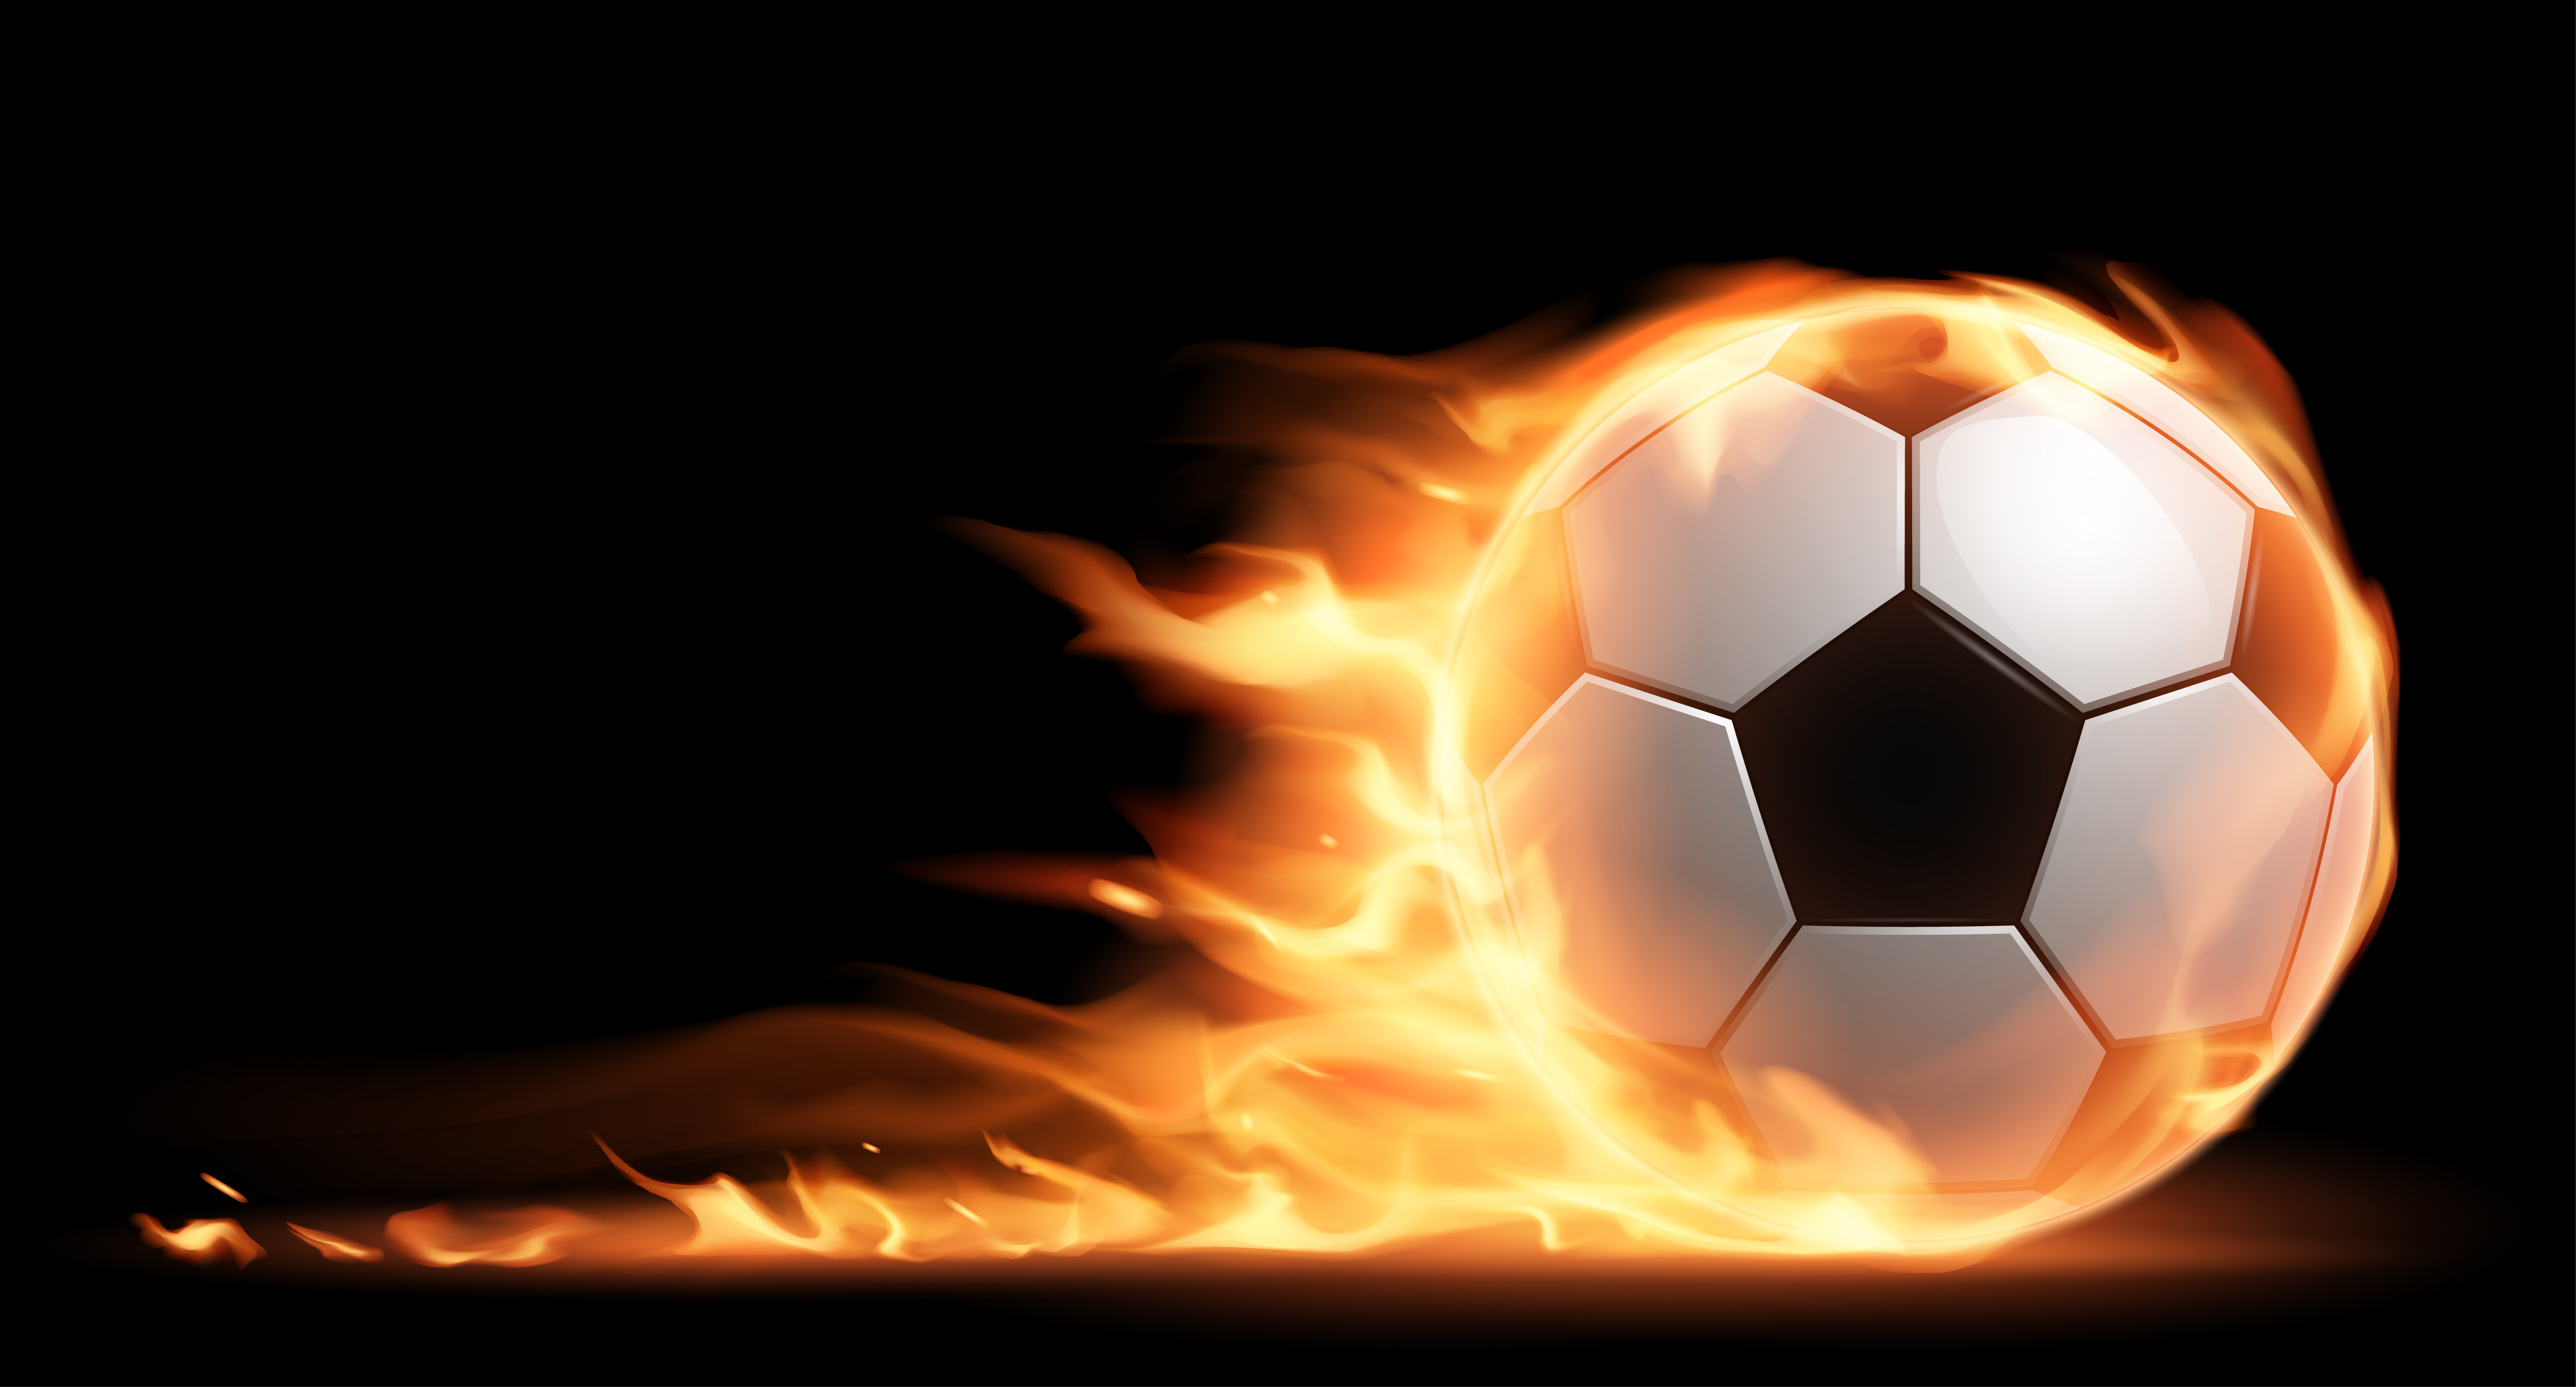 Picture of Soccer Balls on Fire in High Resolution Wallpaper. Wallpaper Download. High Resolution Wallpaper